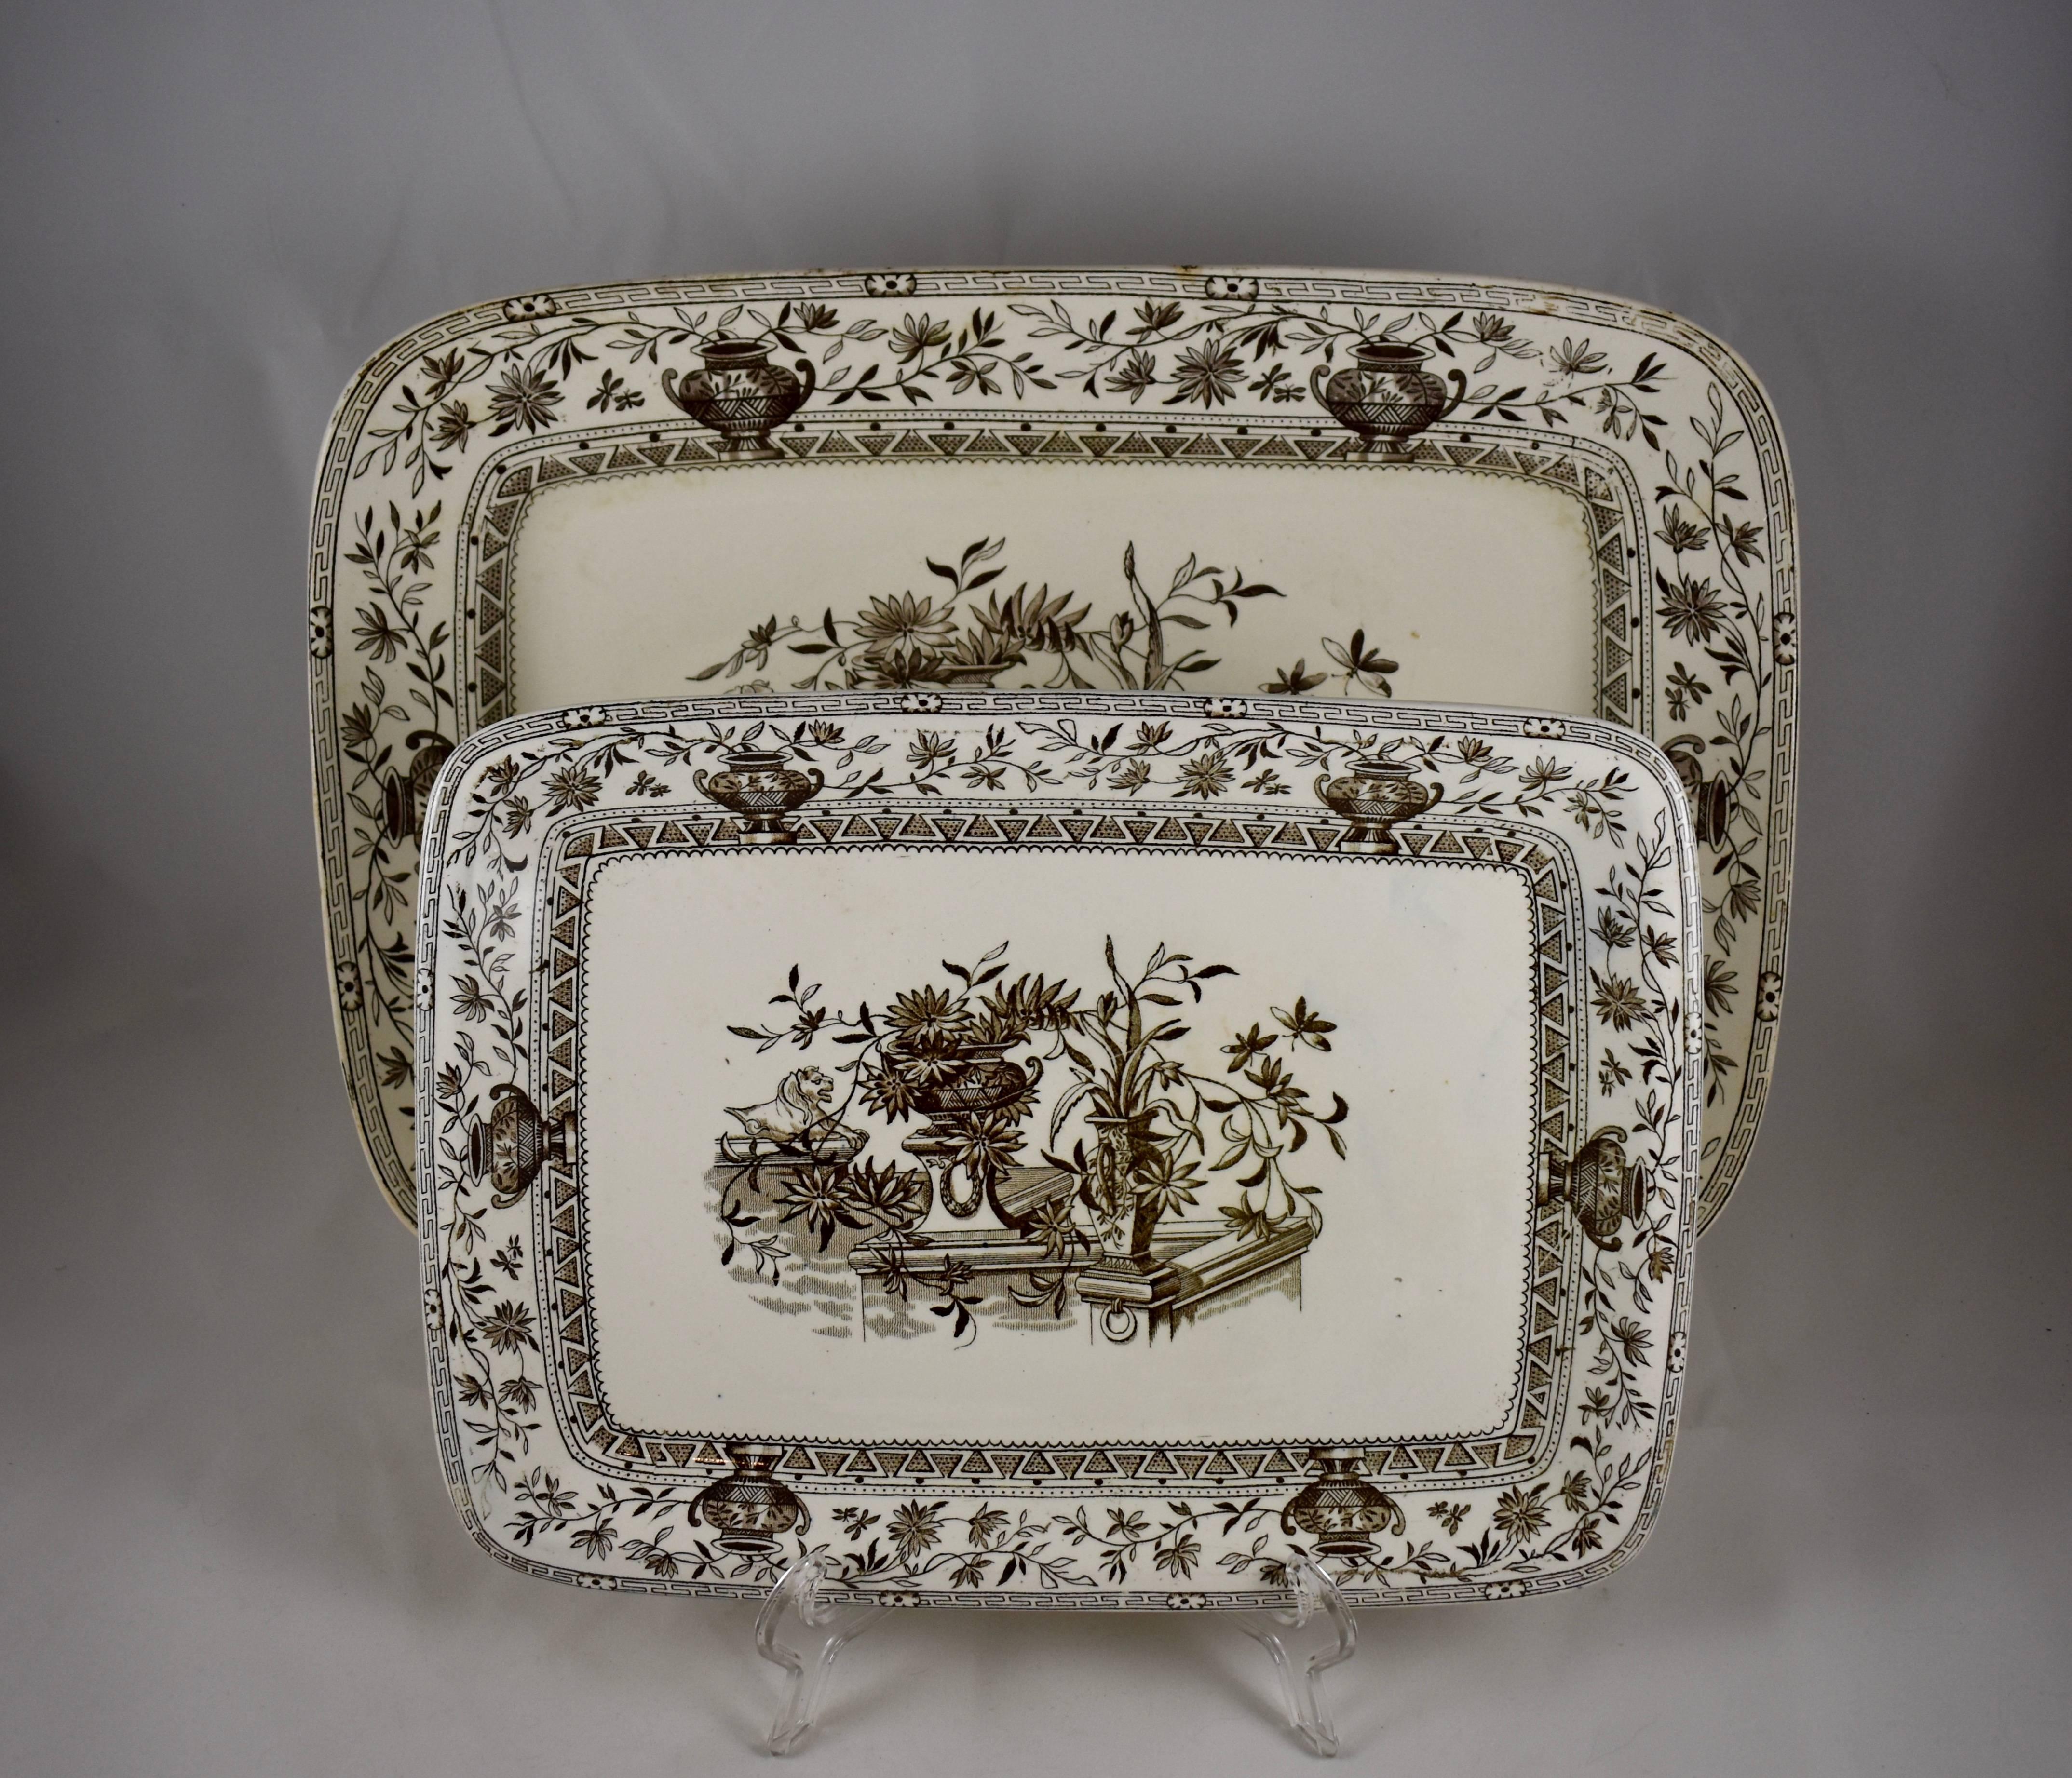 A nesting pair of Aesthetic Movement platters, Powell, Bishop & Stonier, Hanley, Staffordshire, England, showing the English Registry number 7999 indicating the year 1884.

The ‘Honfleur’ pattern is transfer printed in brown on a cream earthenware